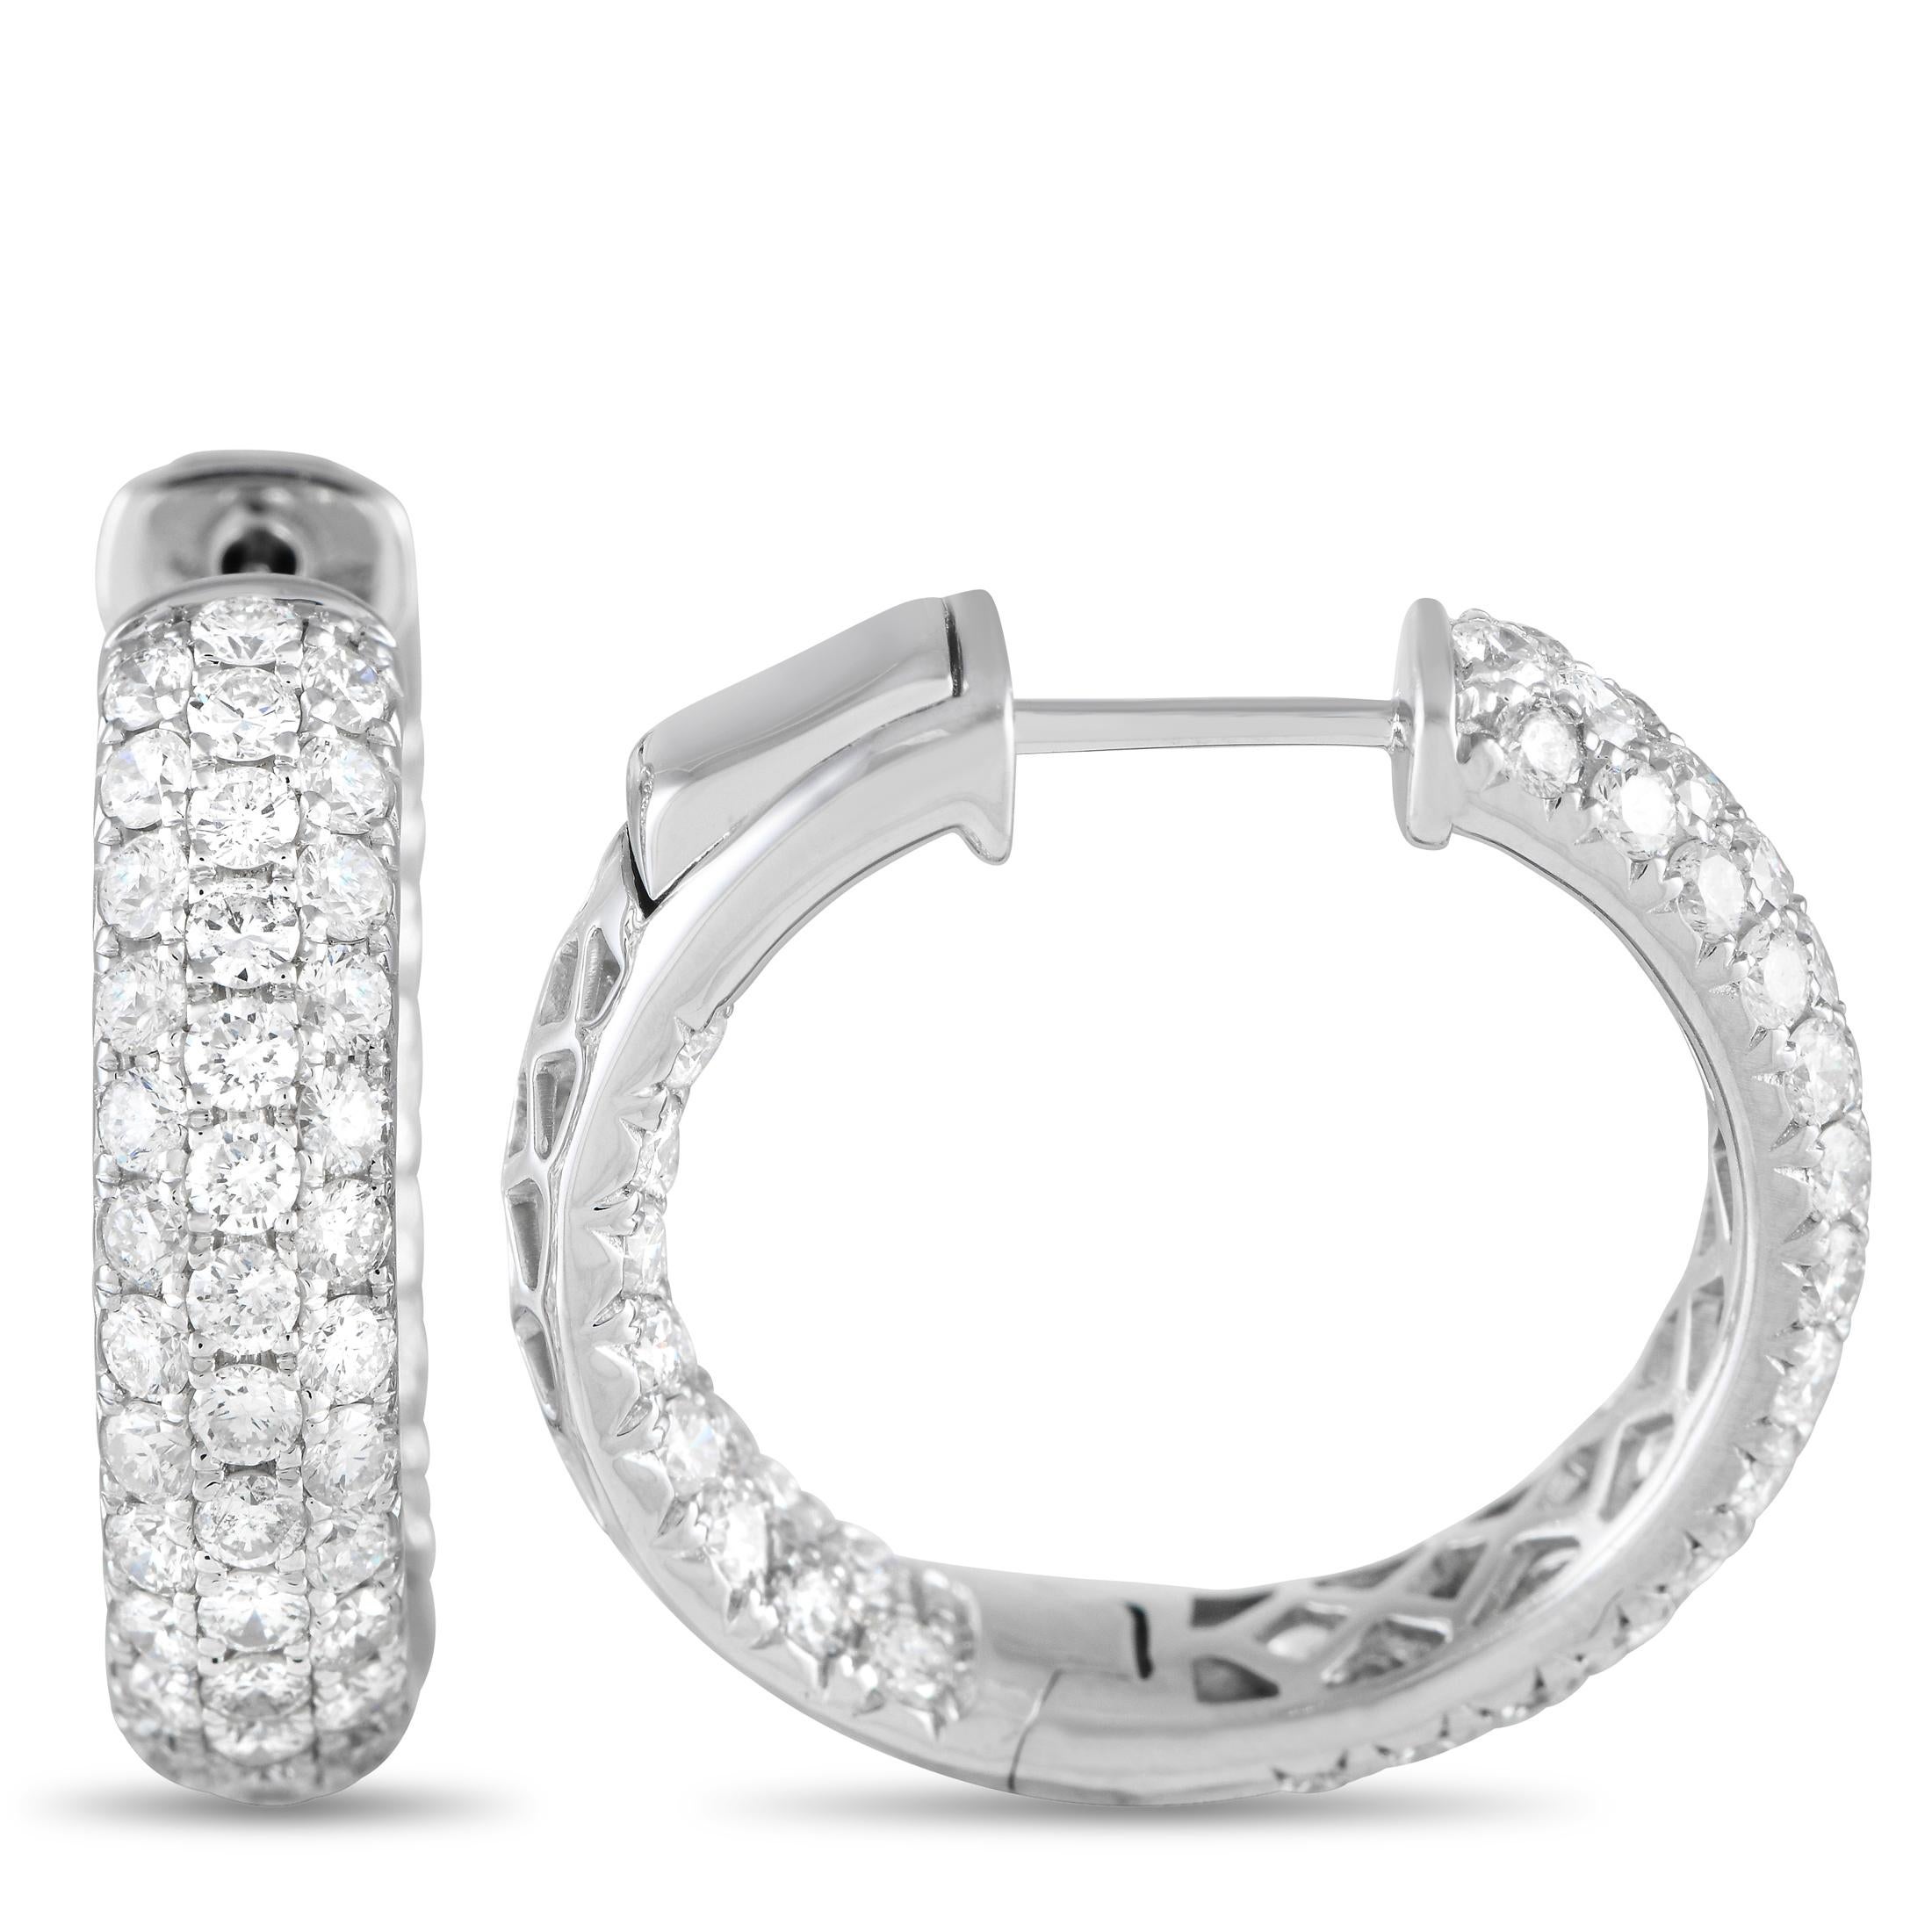 These hoops are packed with sparkle. Along the inner back and outside surface of each hoop are three rows of diamonds that shimmer with elegance. Each hoop measures 0.85